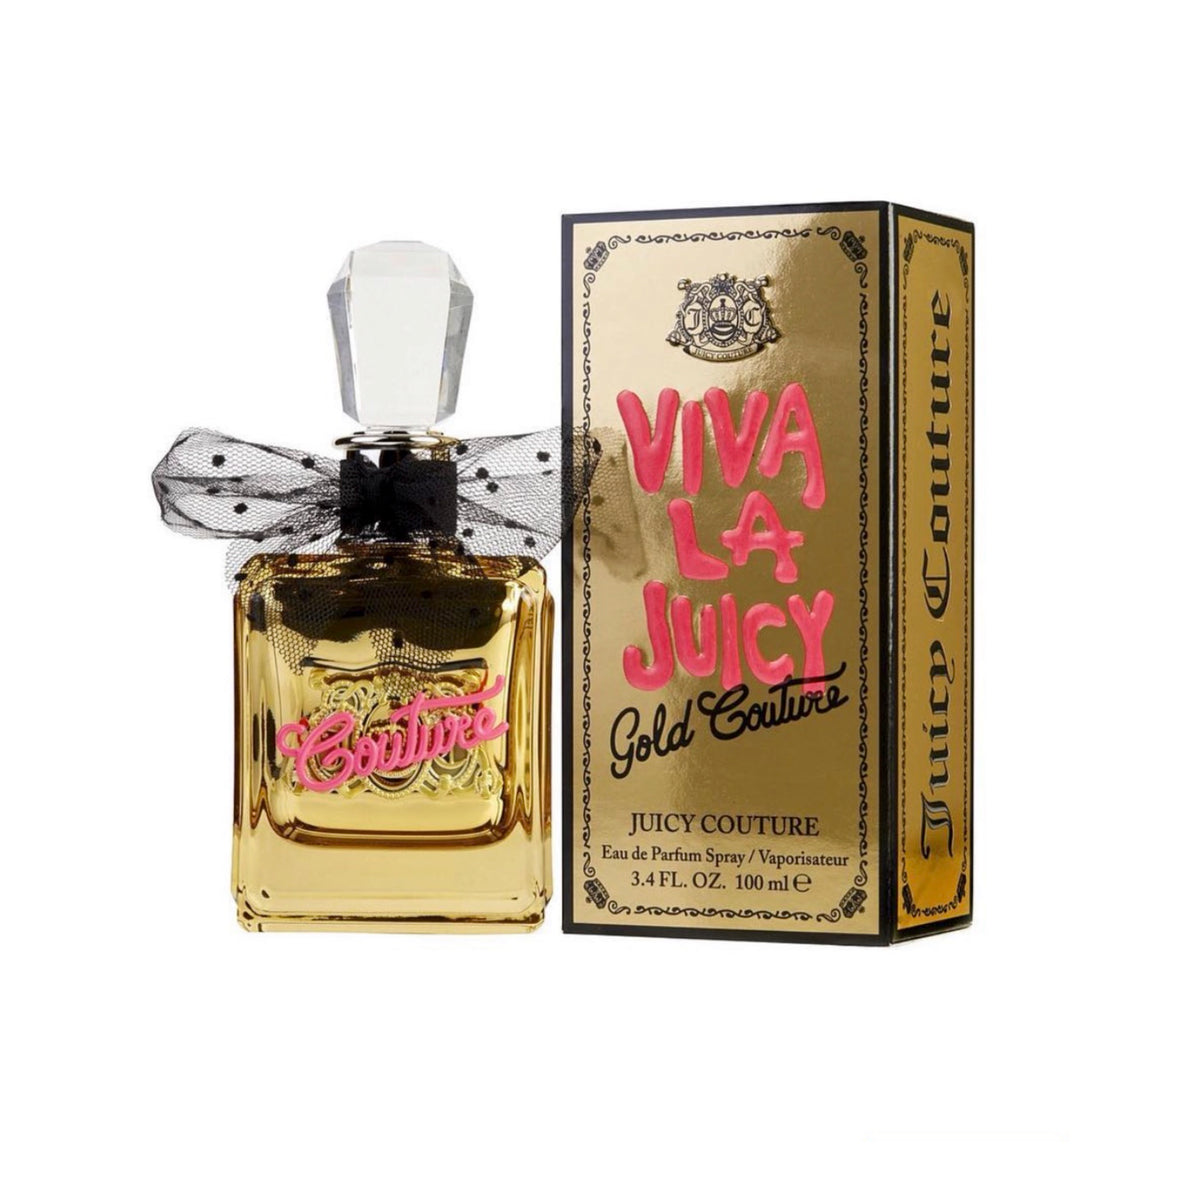 Viva couture. Viva juicy Couture Gold 100 мл. Viva la juicy Gold Couture 100 мл. Juicy Couture Viva Gold Couture. Juicy Couture духи золотые.